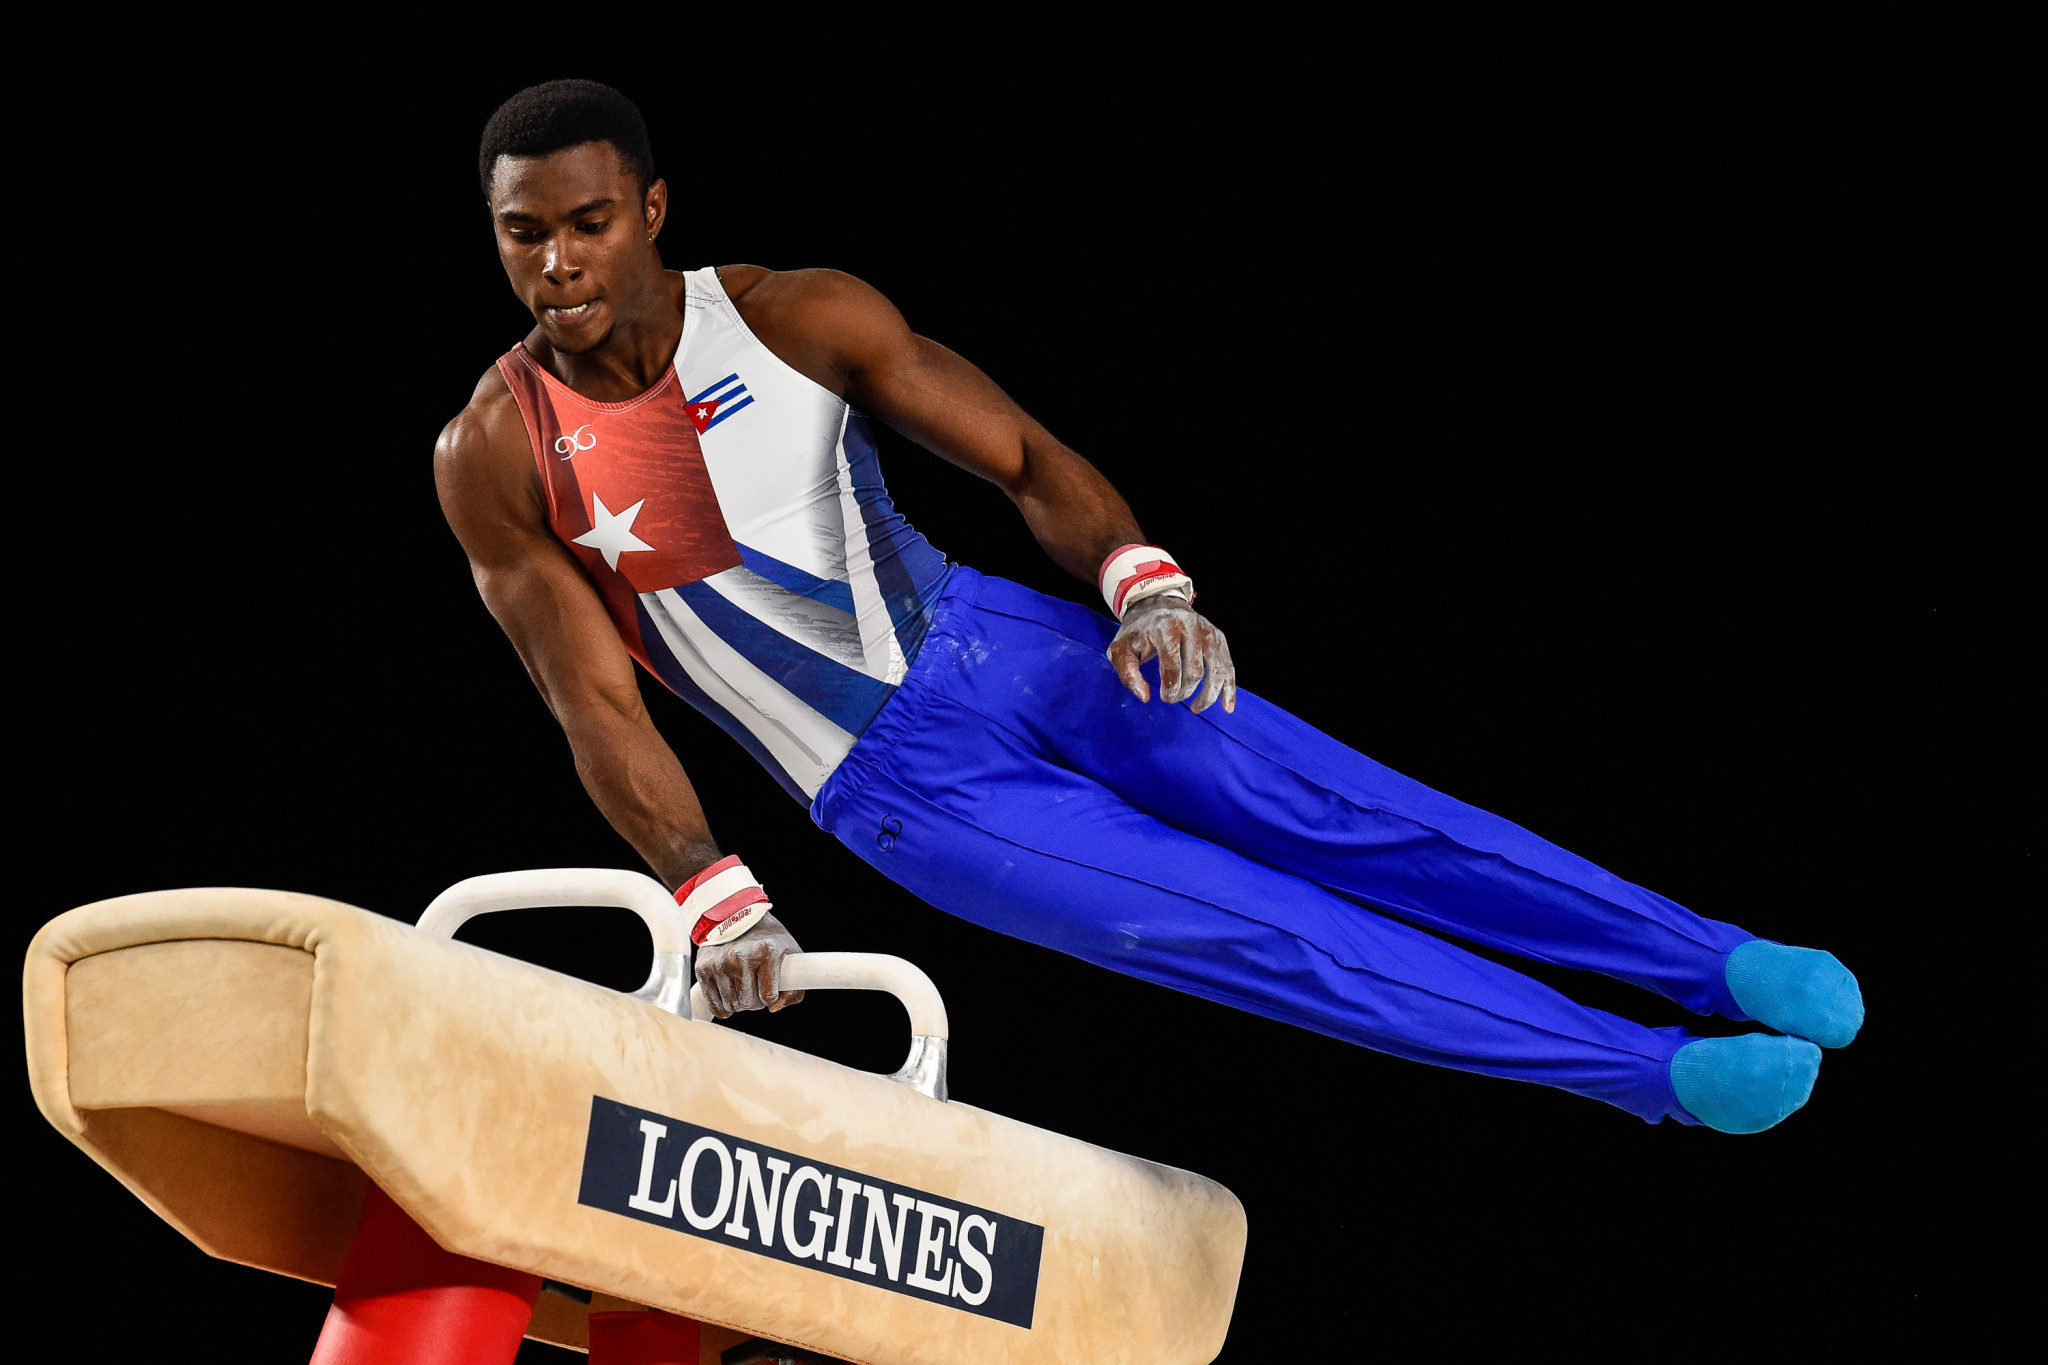 Double world medallist Manrique Larduet of Cuba topped the pommel horse qualification standings on the opening day of the FIG World Challenge Cup in Guimarães in Portugal ©Getty Images